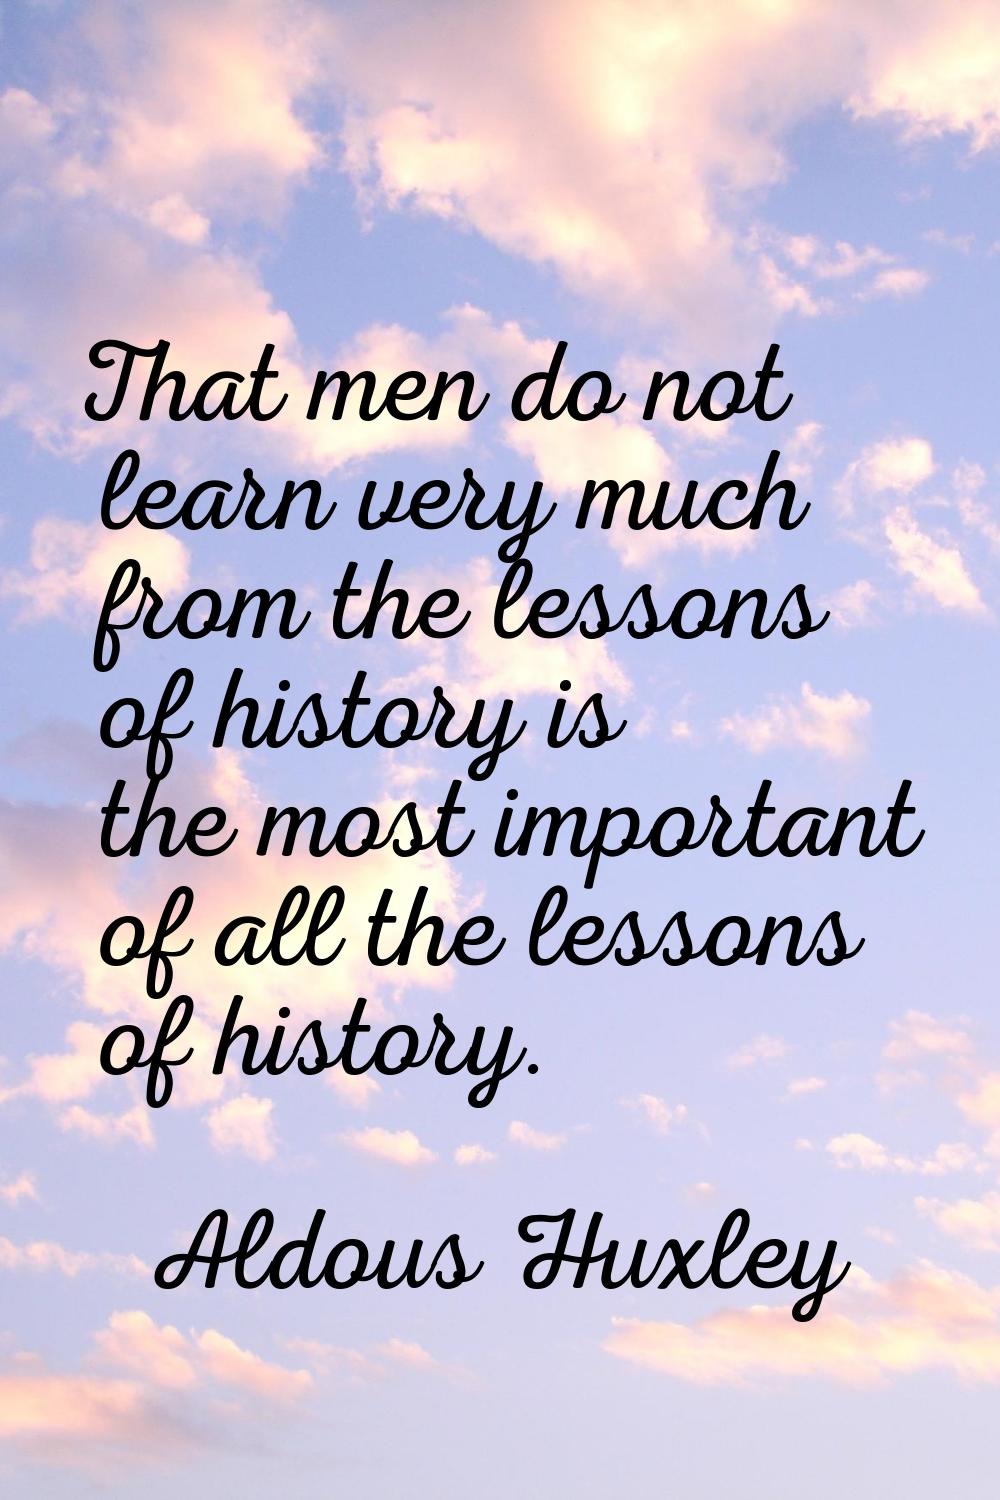 That men do not learn very much from the lessons of history is the most important of all the lesson